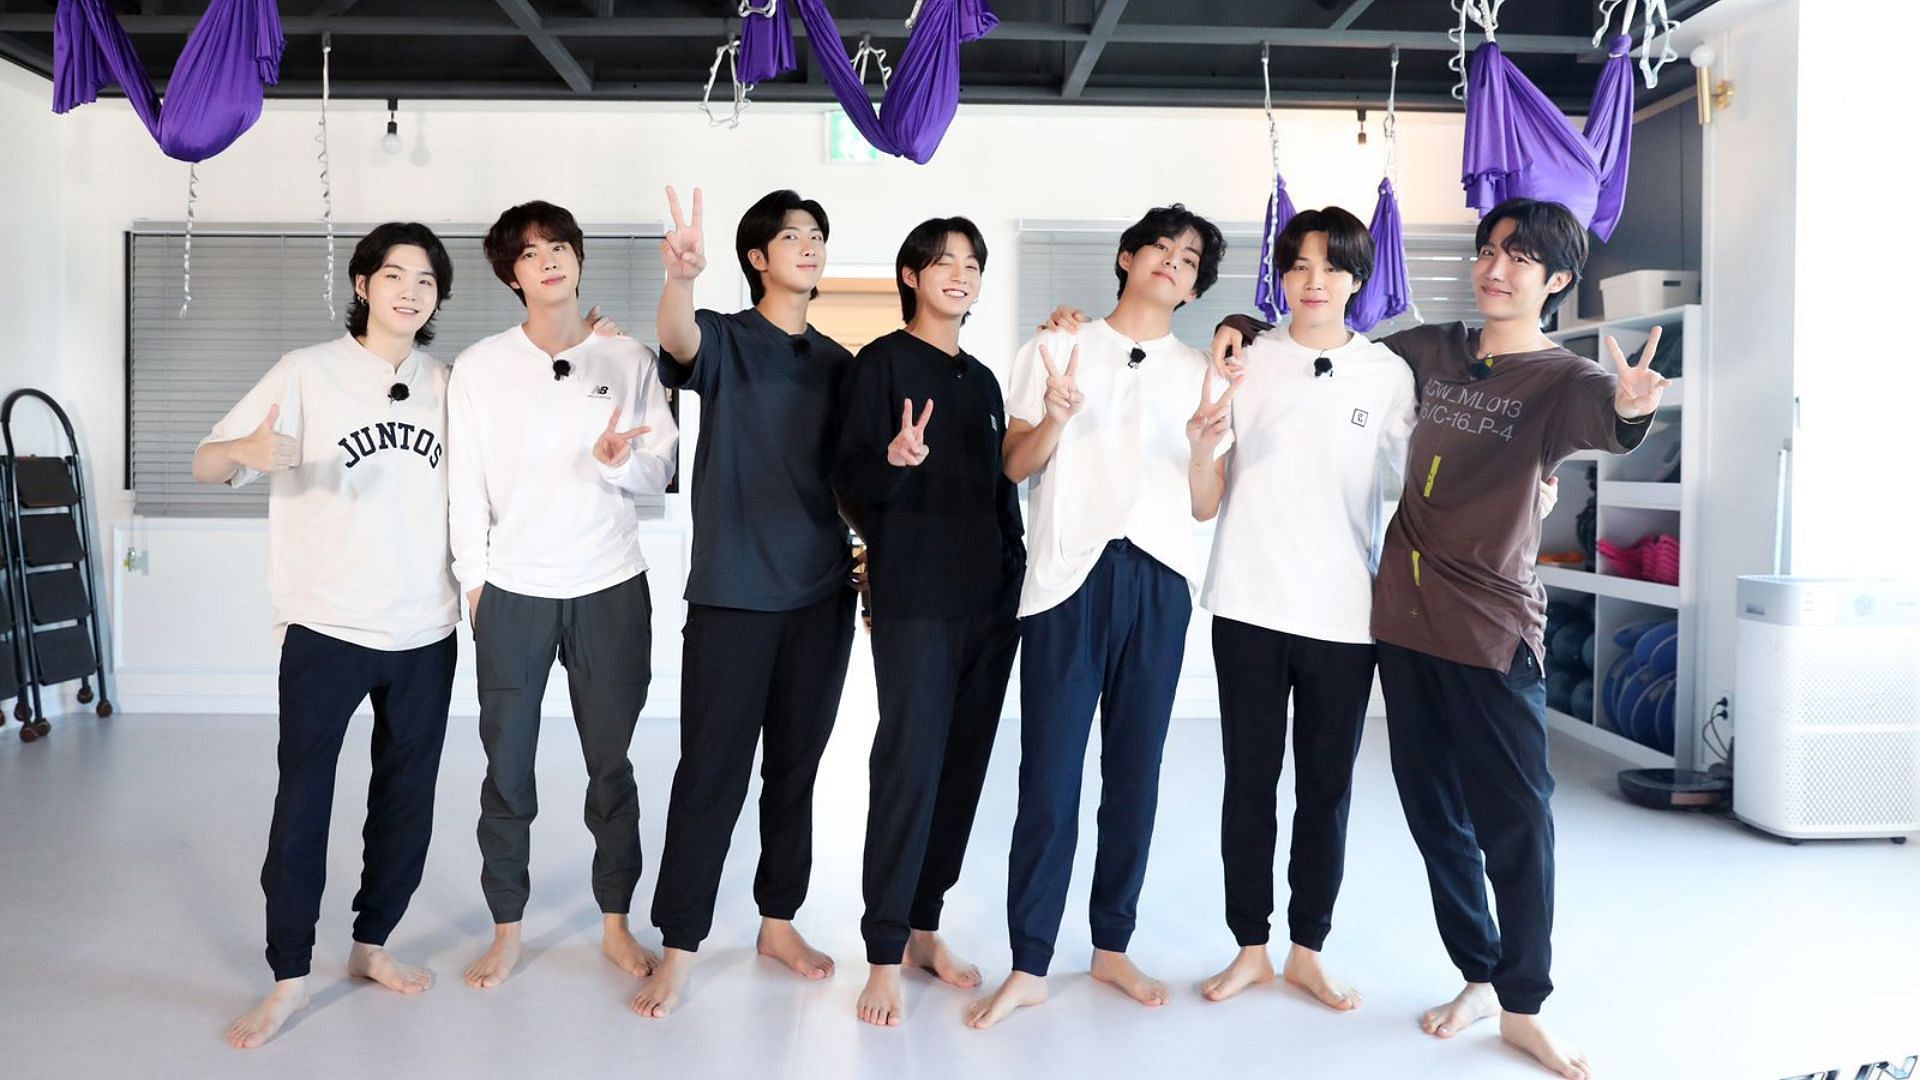 The band pose for the Run BTS Flying Yoga episode. (Image via Weverse/ BTS)